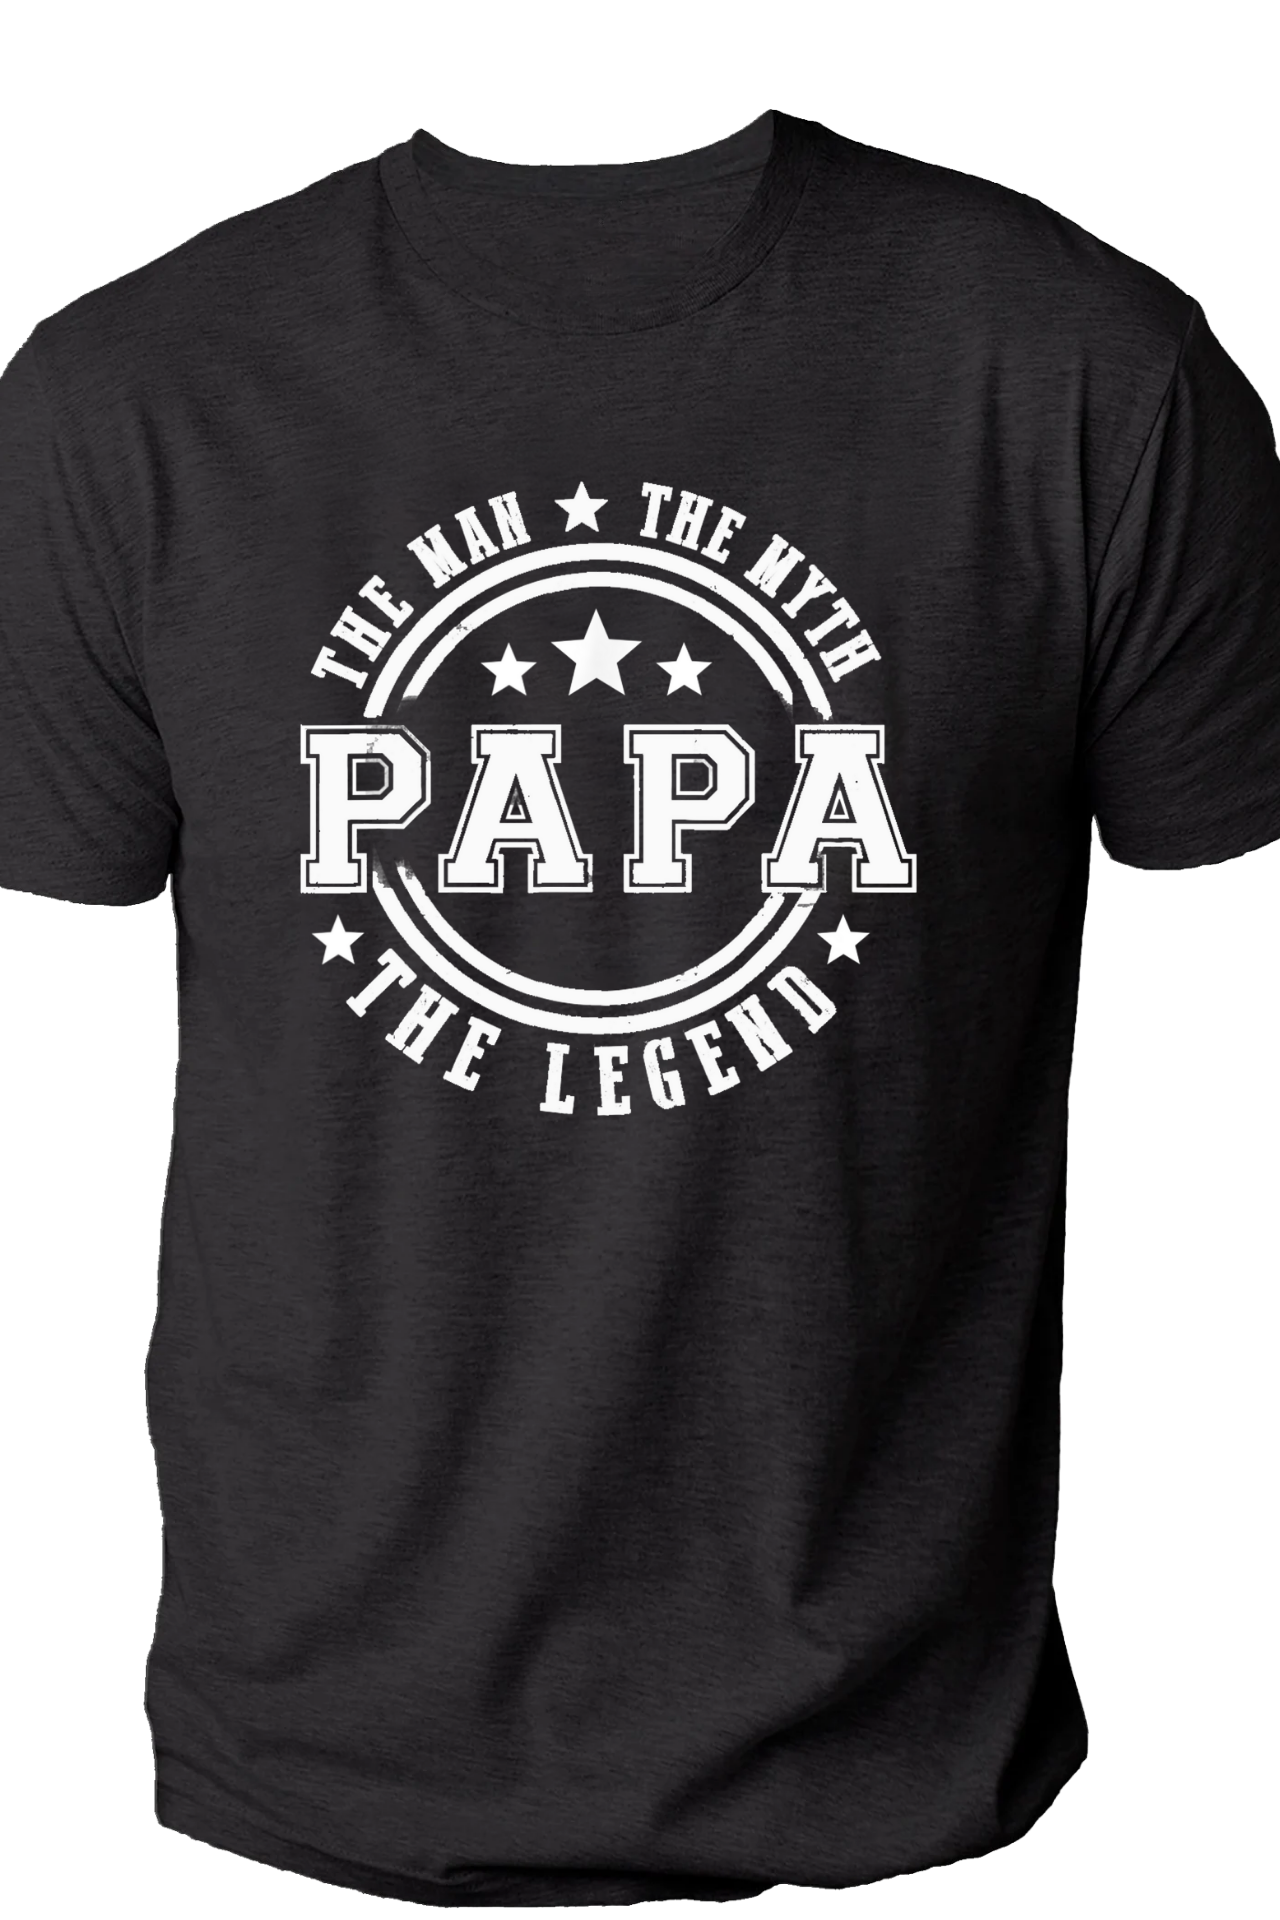 The Man, the Myth, the Legend Papa -Deluxe Cotton TShirt